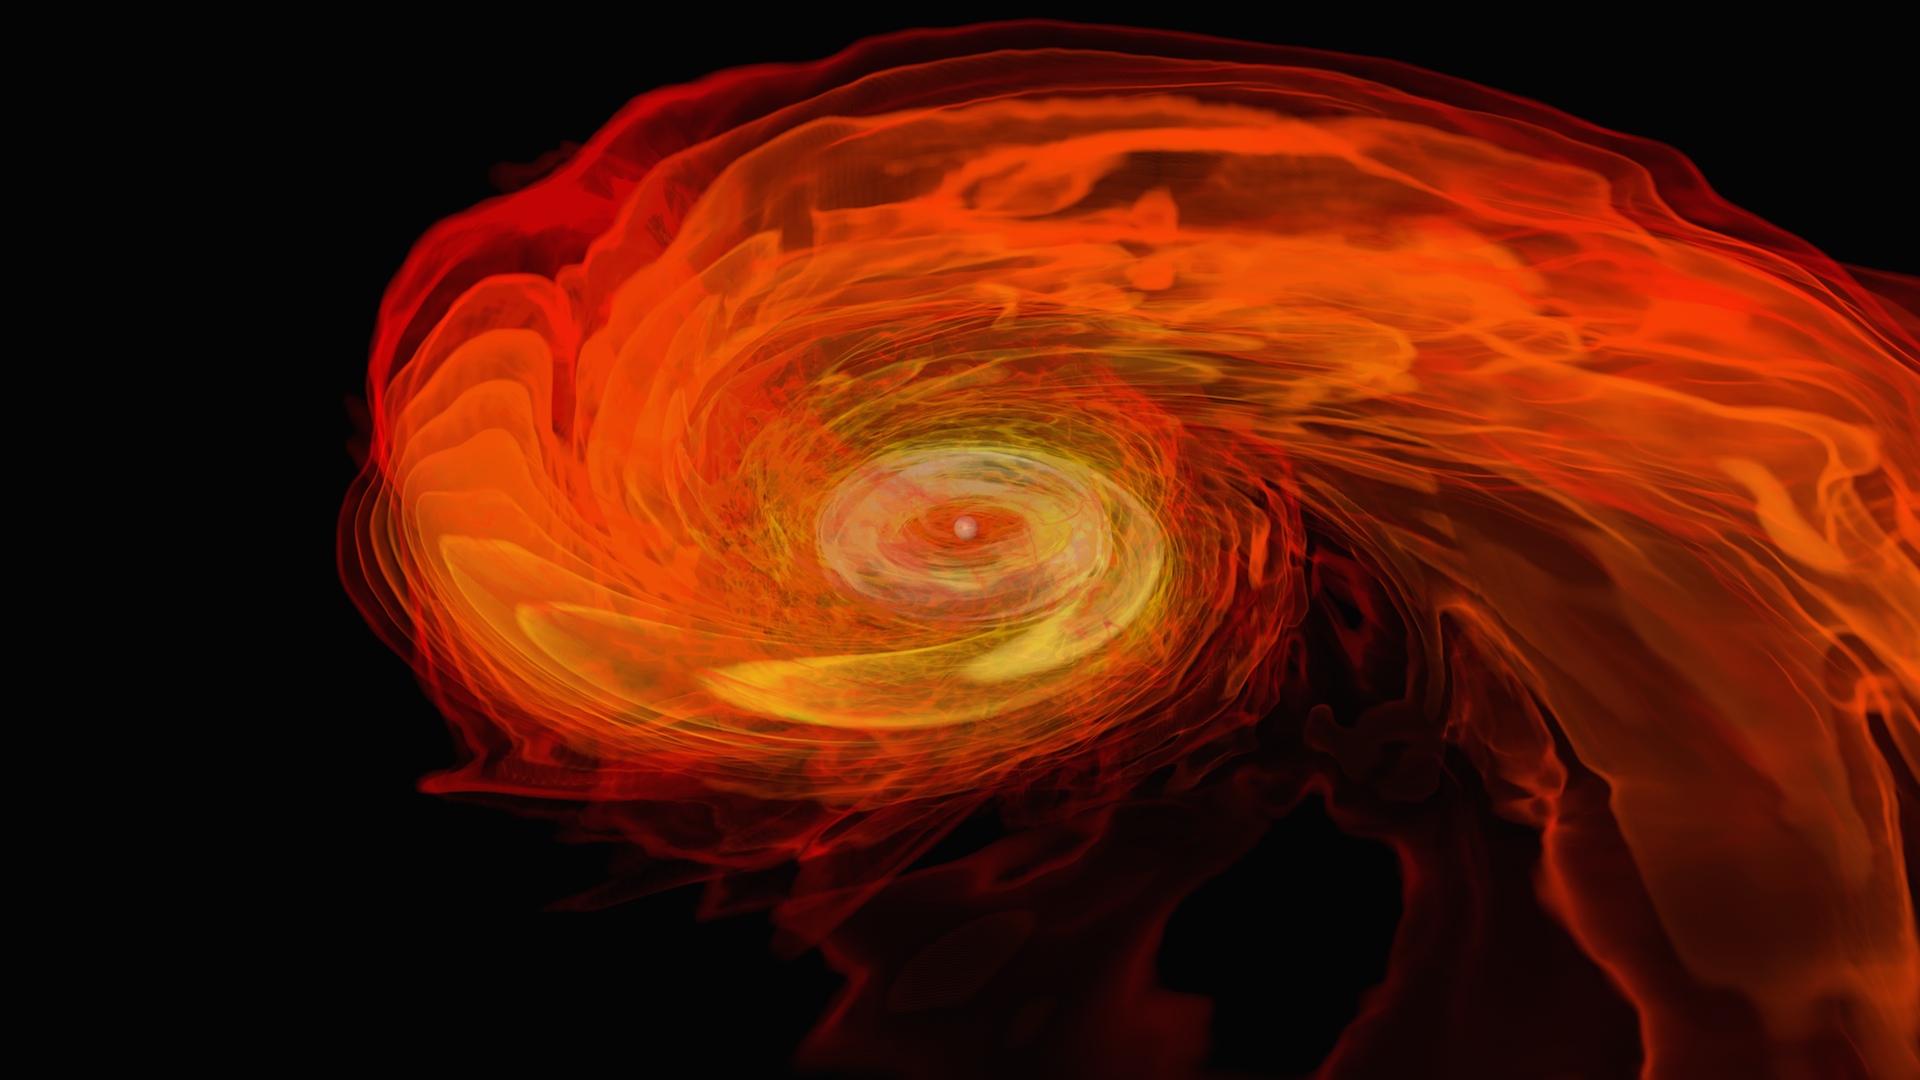 Preview Image for Neutron Stars Rip Each Other Apart to Form Black Hole